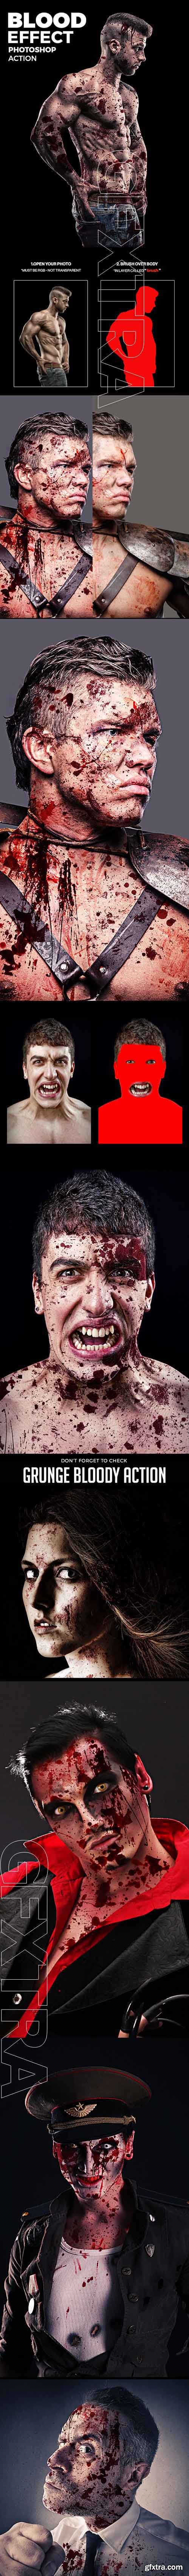 GraphicRiver - Blood Effect Photoshop Action 21091265